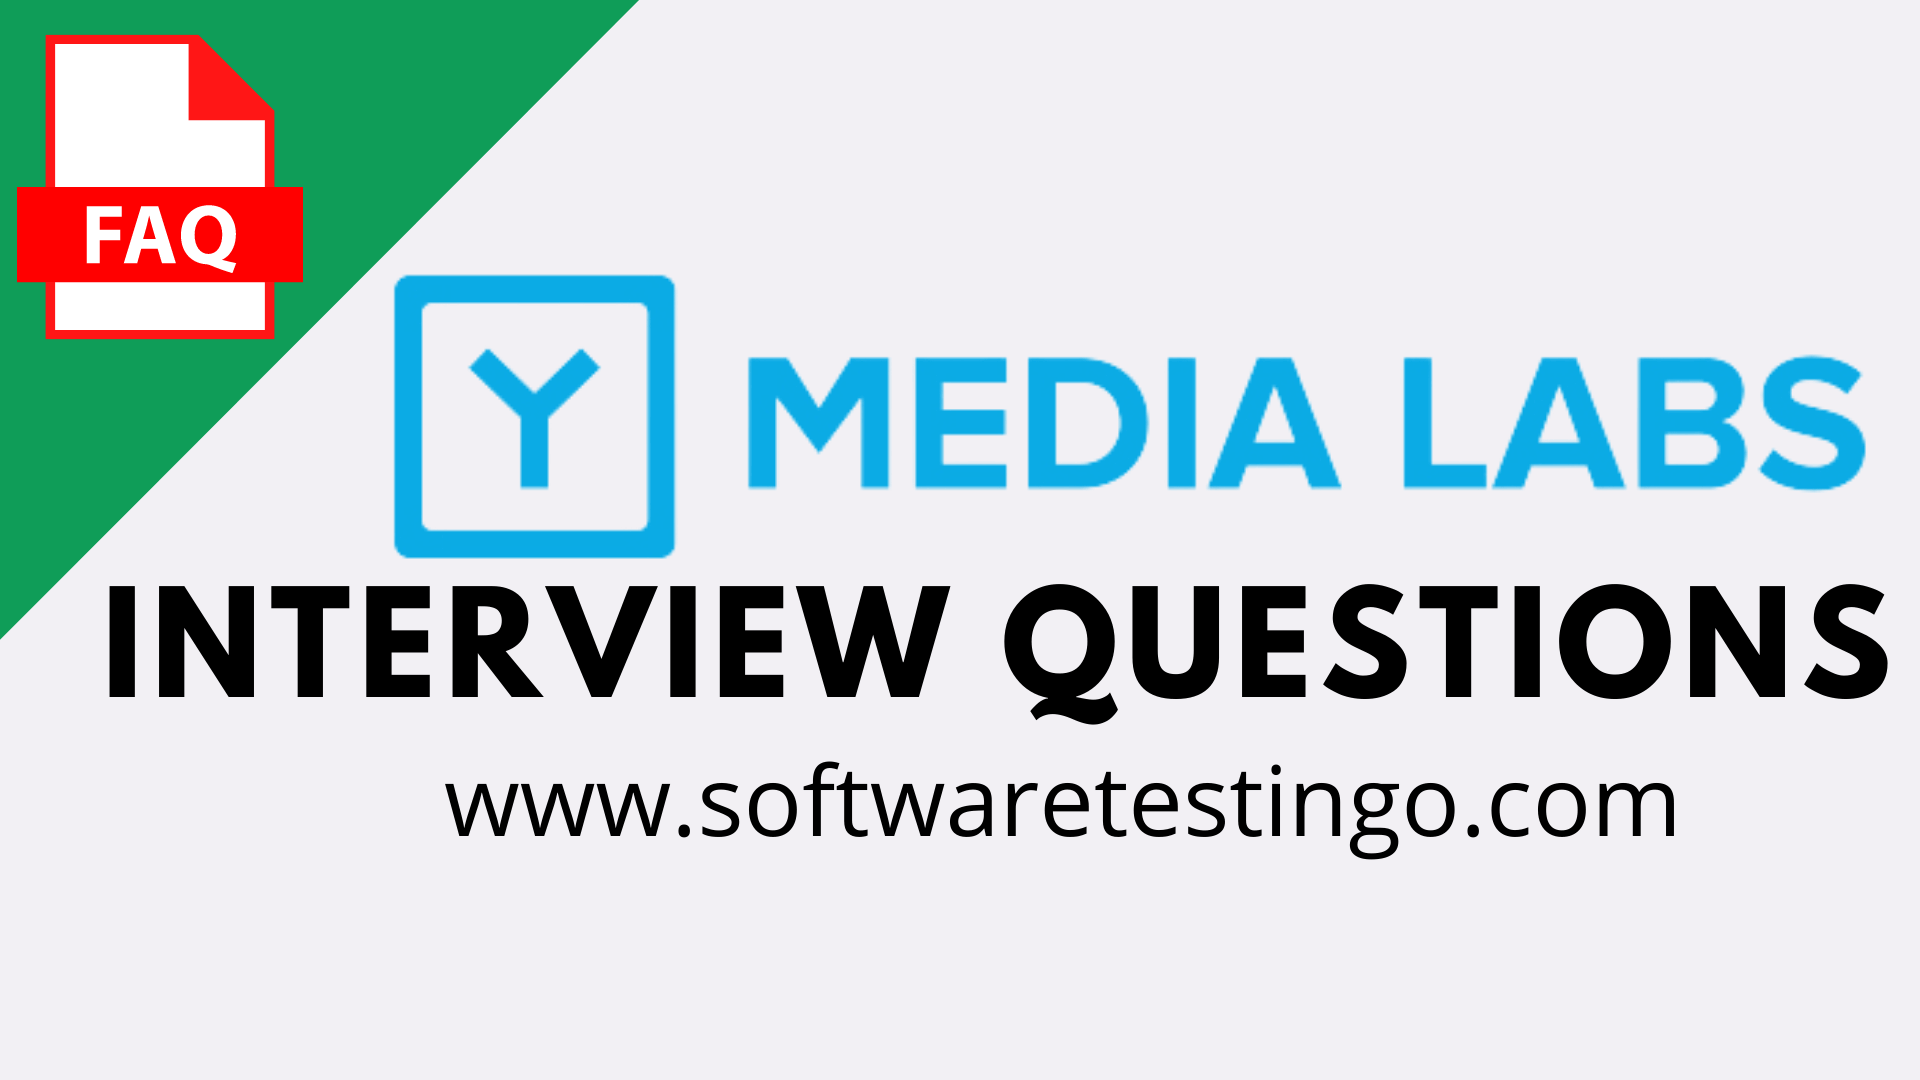 Y Media Labs Interview Questions